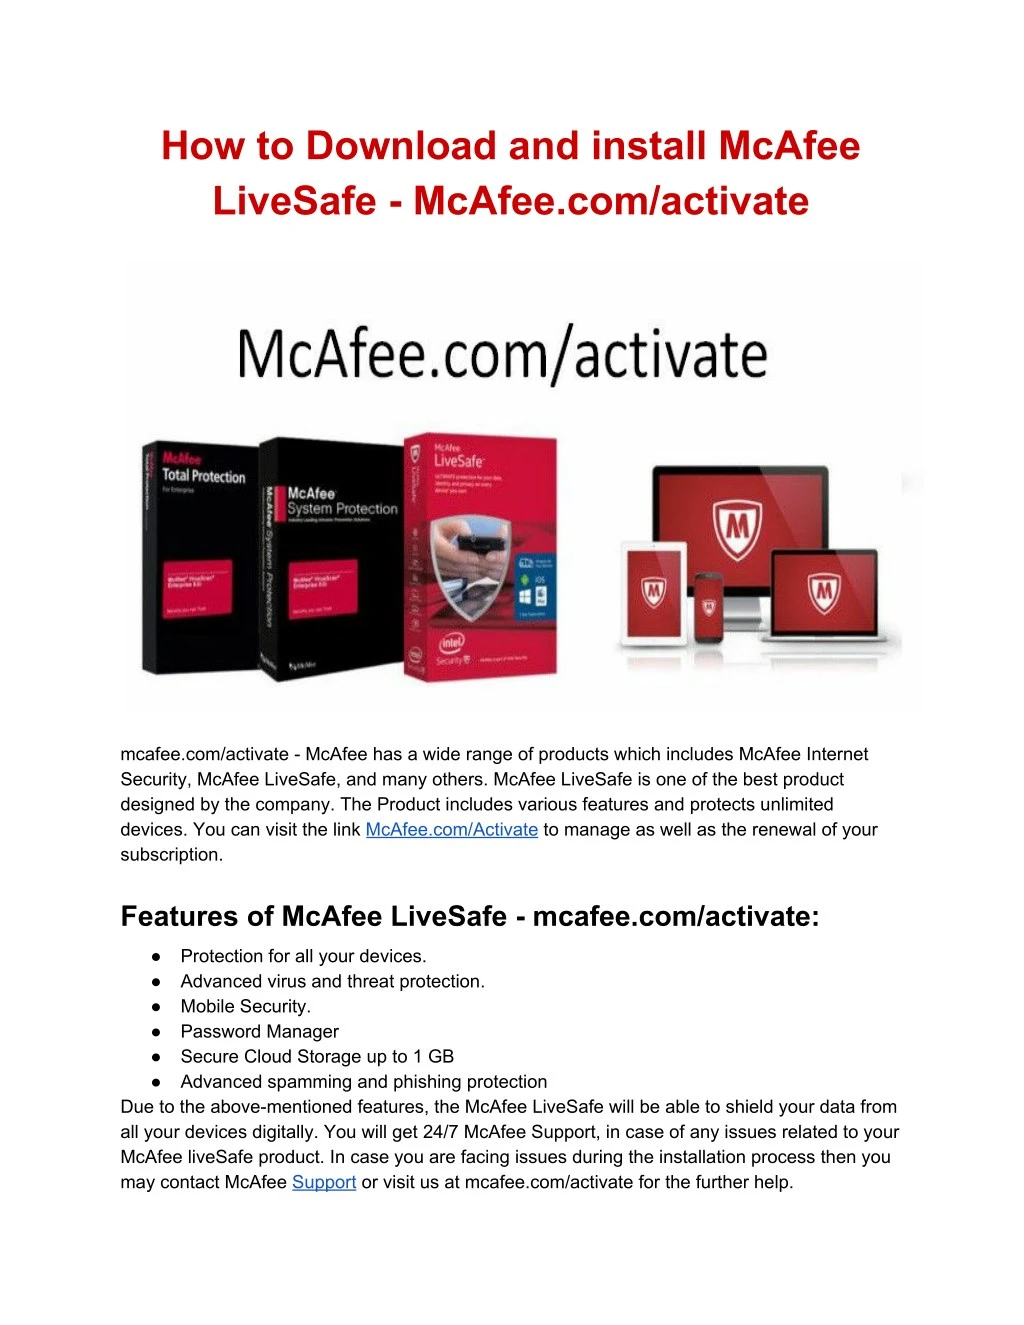 how to download and install mcafee livesafe